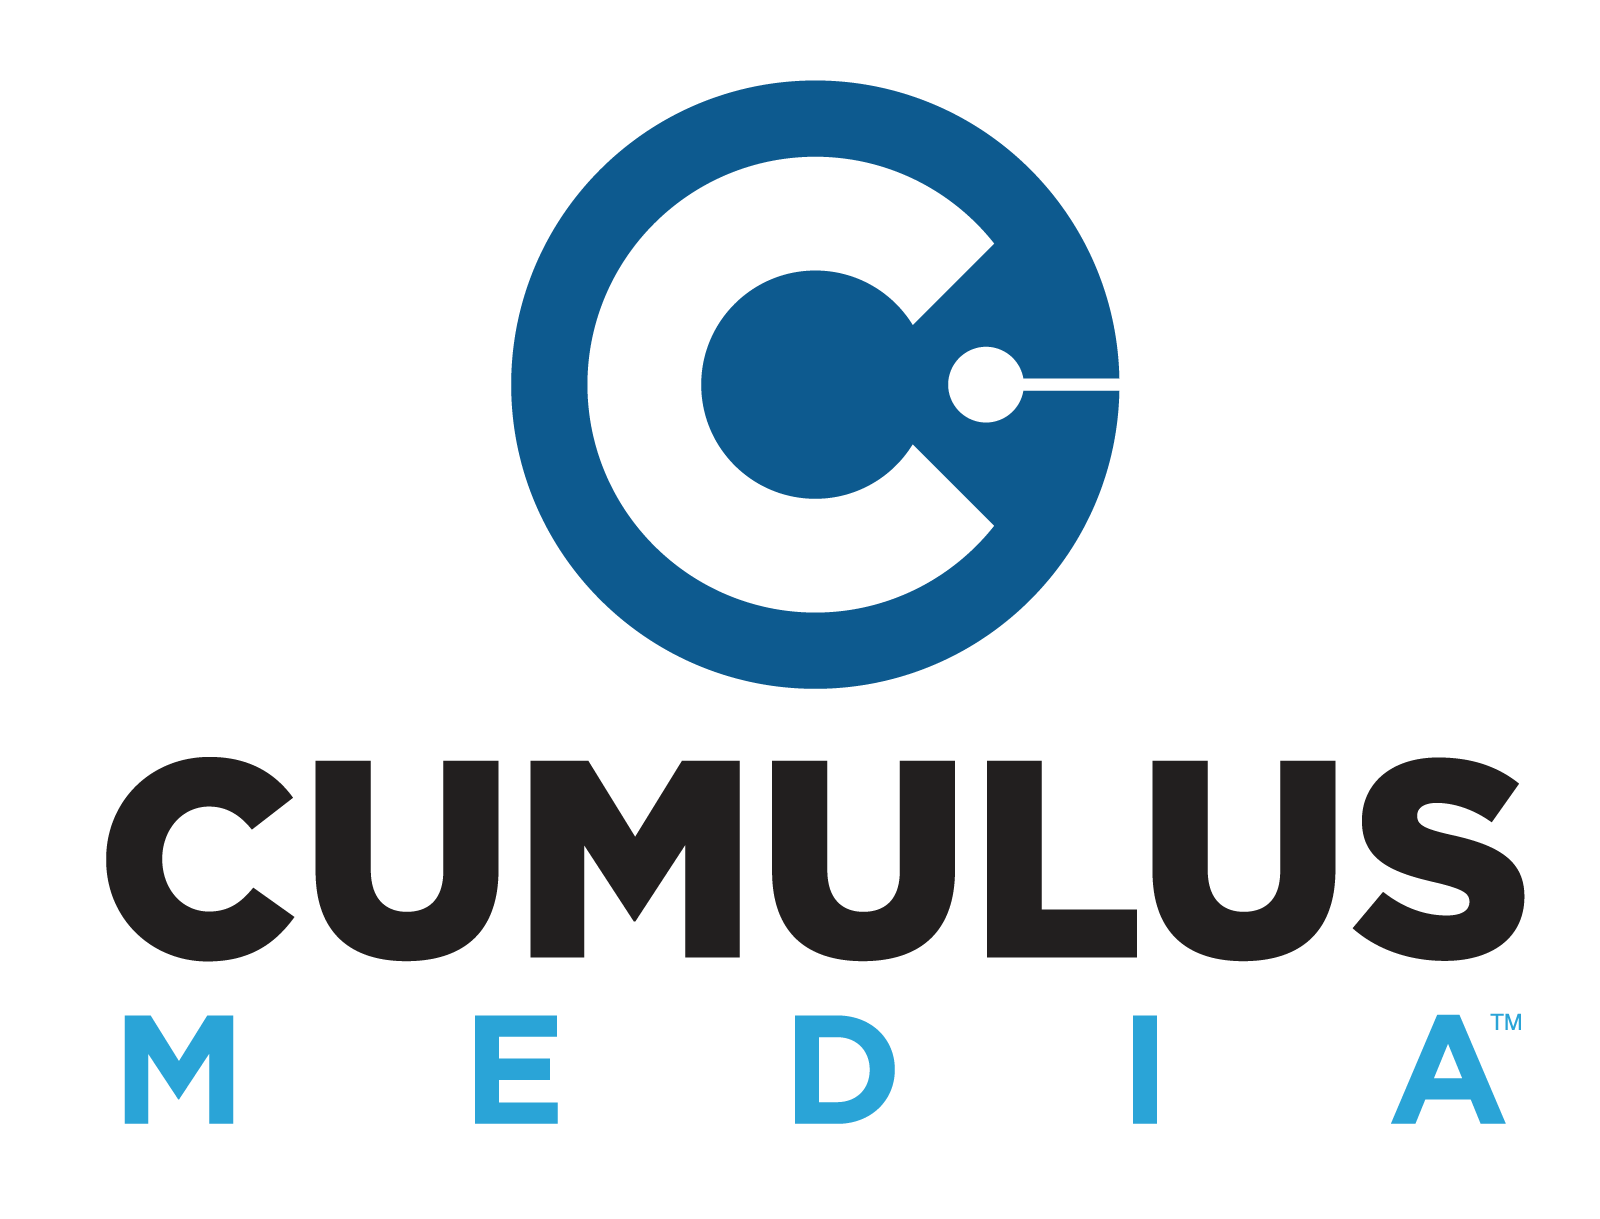 CUMULUS-MEDIA-Stacked (3).png